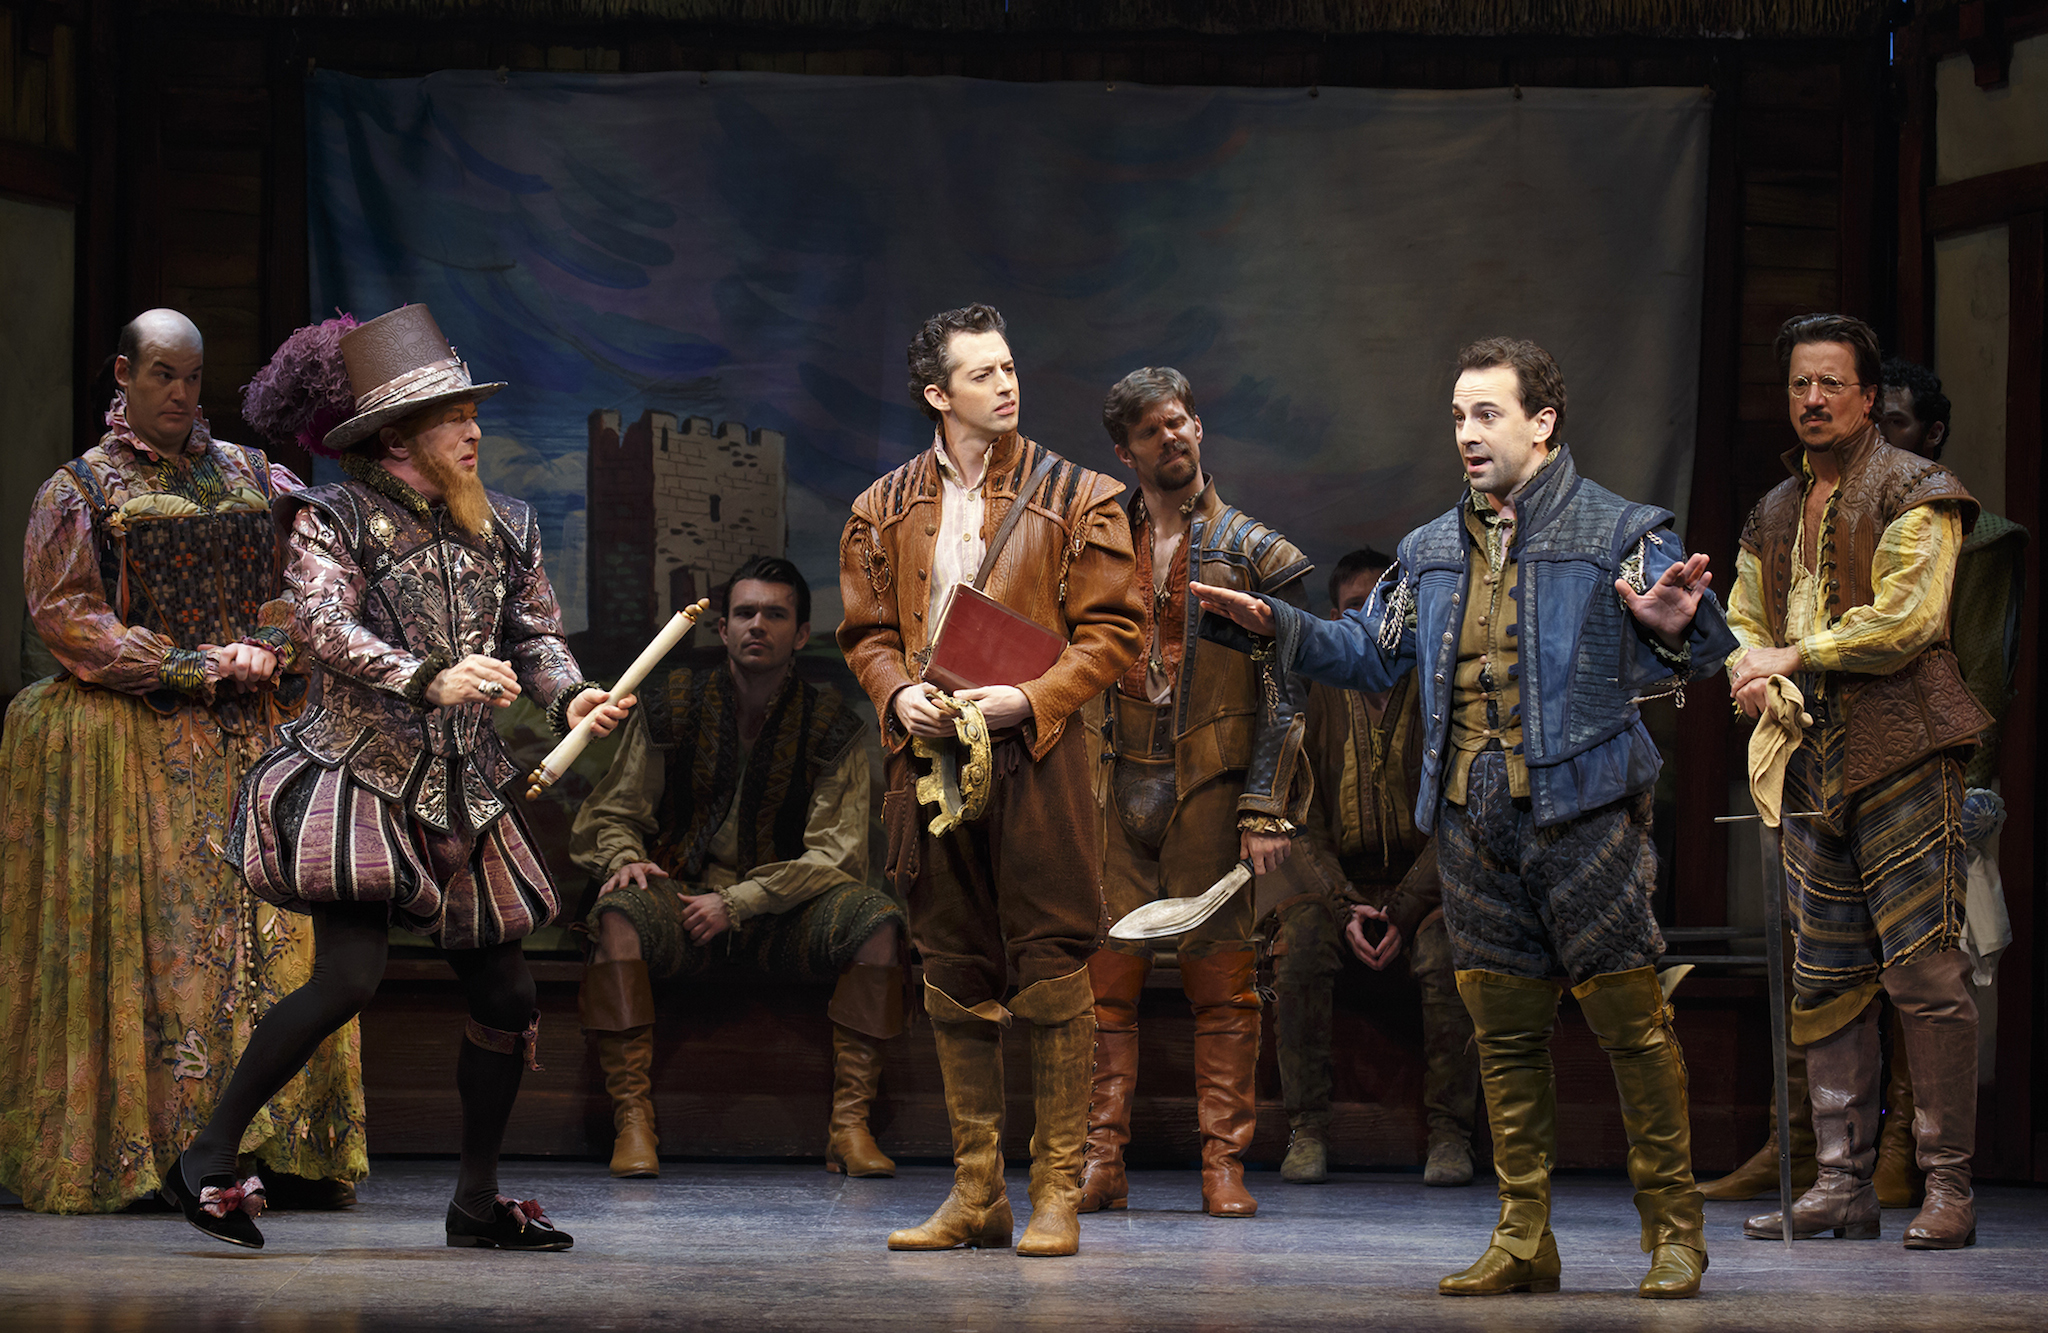 Something Rotten The Musical